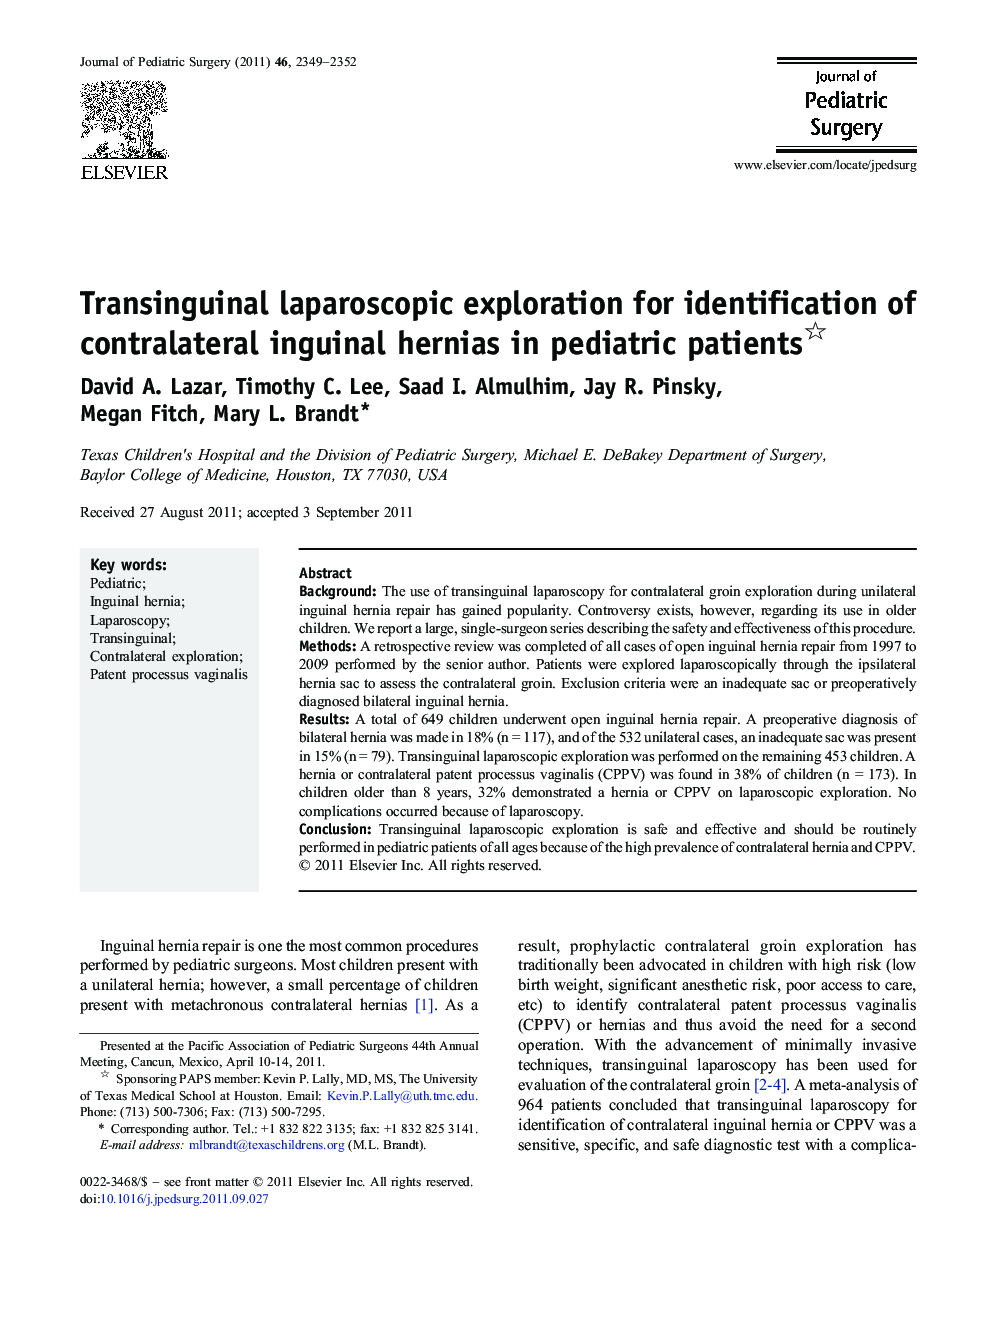 Transinguinal laparoscopic exploration for identification of contralateral inguinal hernias in pediatric patients 